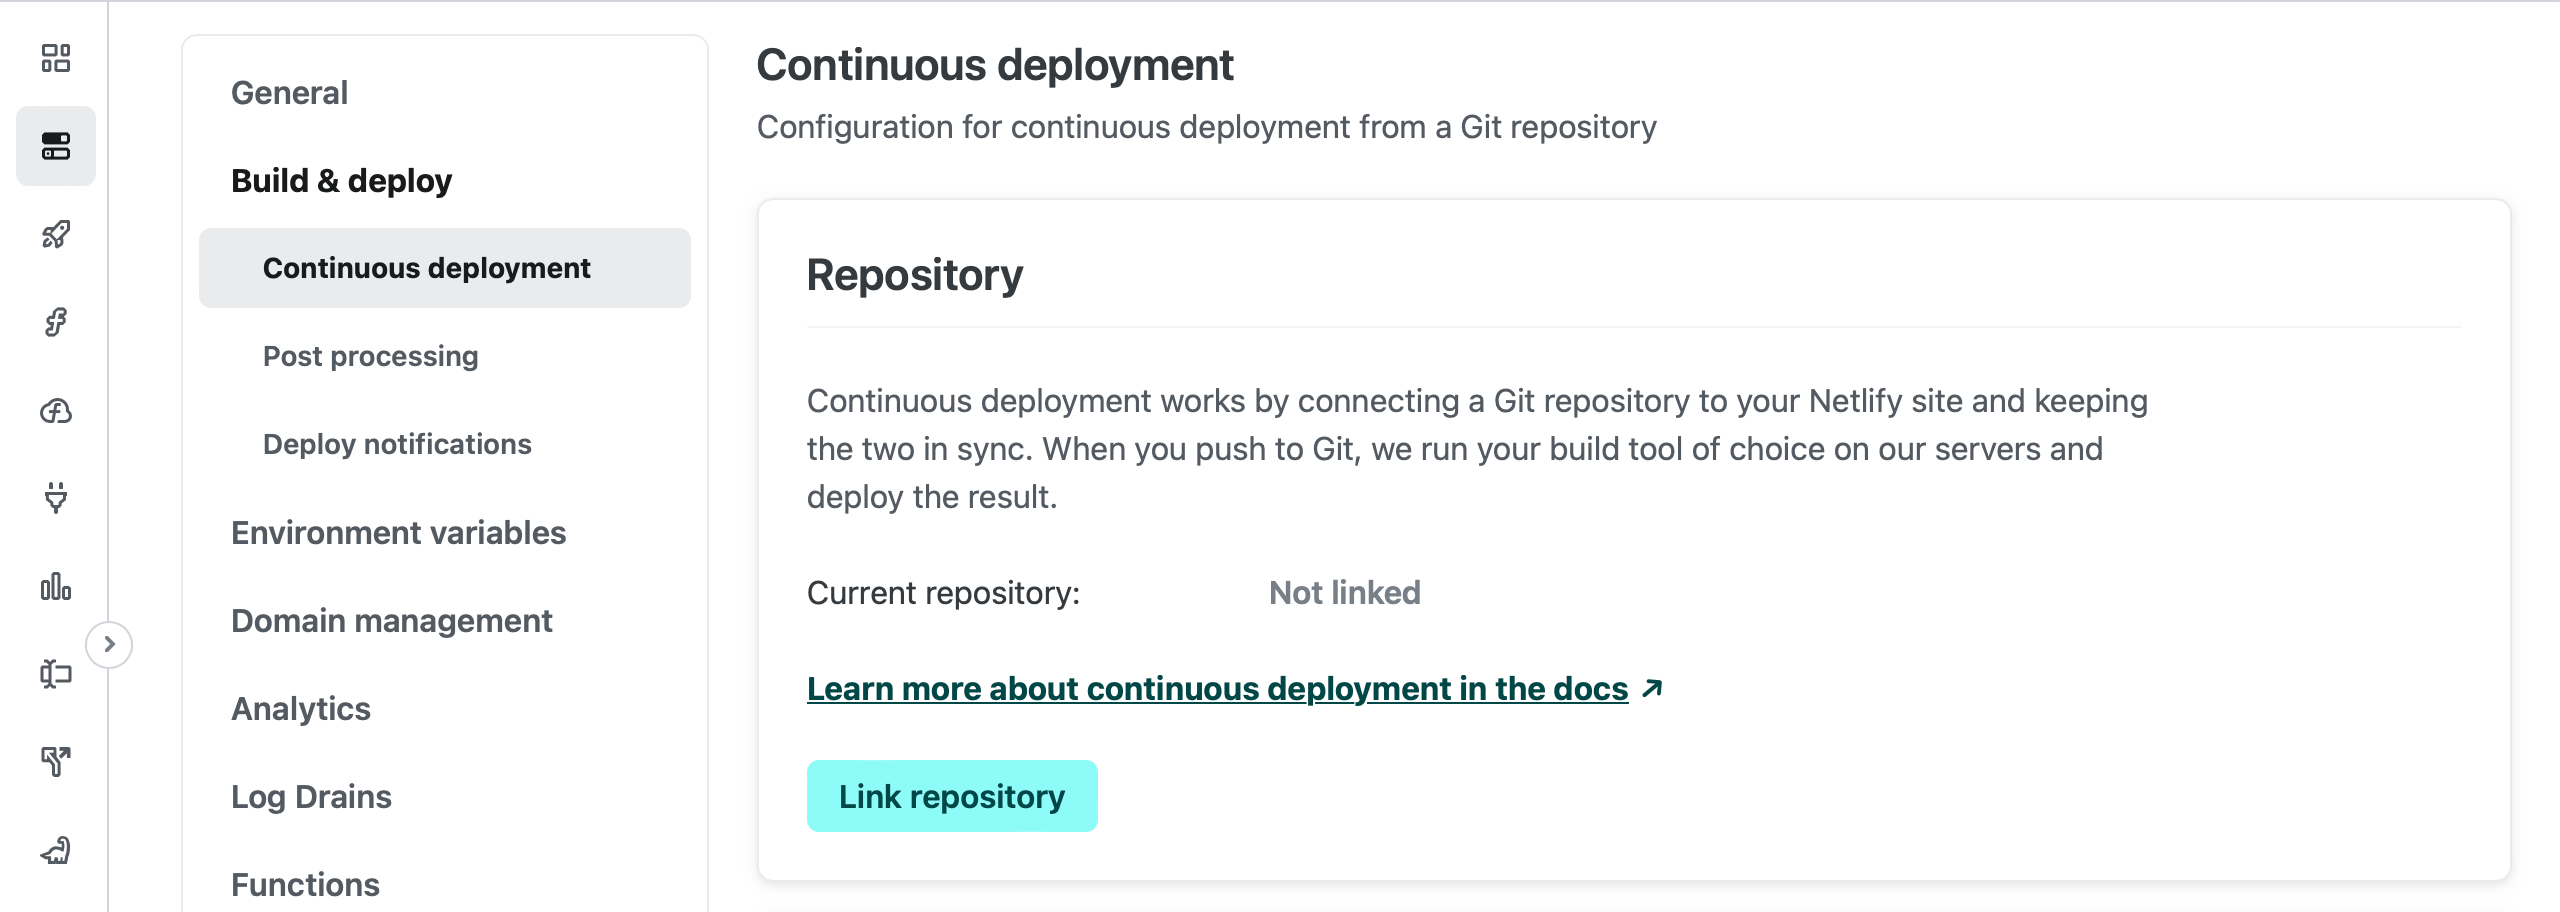 Where you can connect to a Git repository to build and deploy from a continuous integration pipeline in the Netlify UI